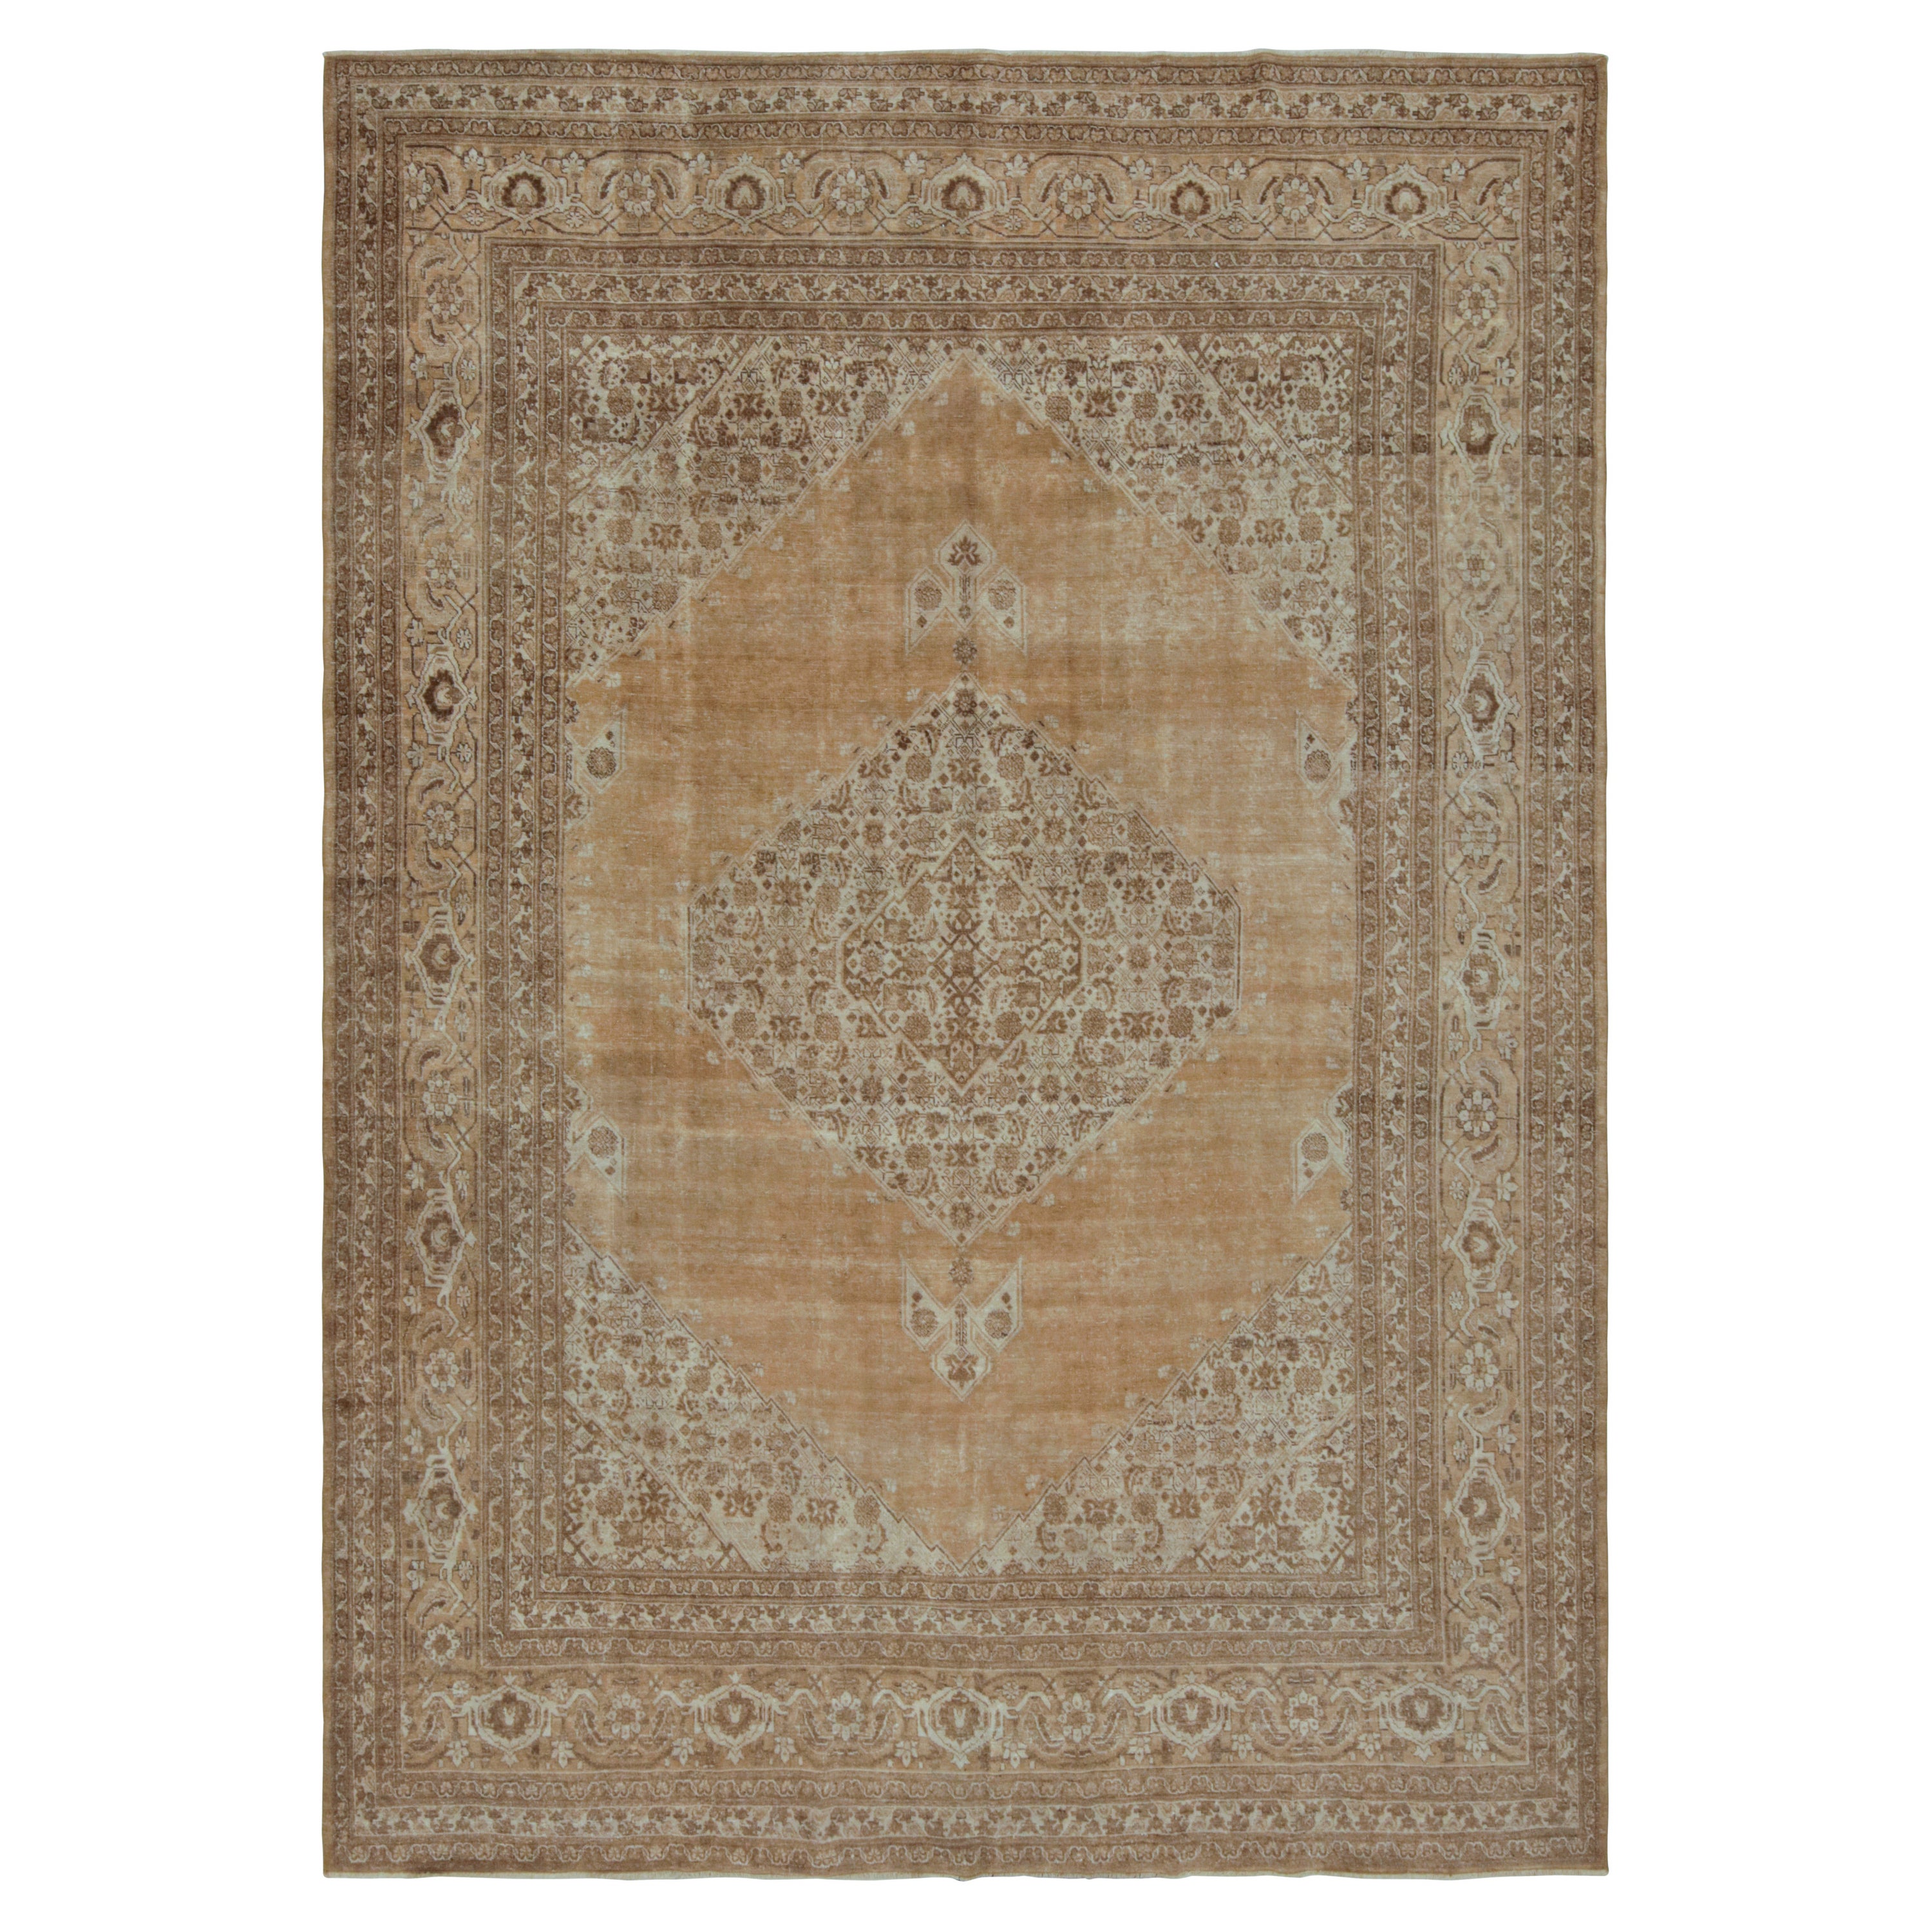 Antique Persian Tabriz Rug in Brown, with Open Field, from Rug & Kilim